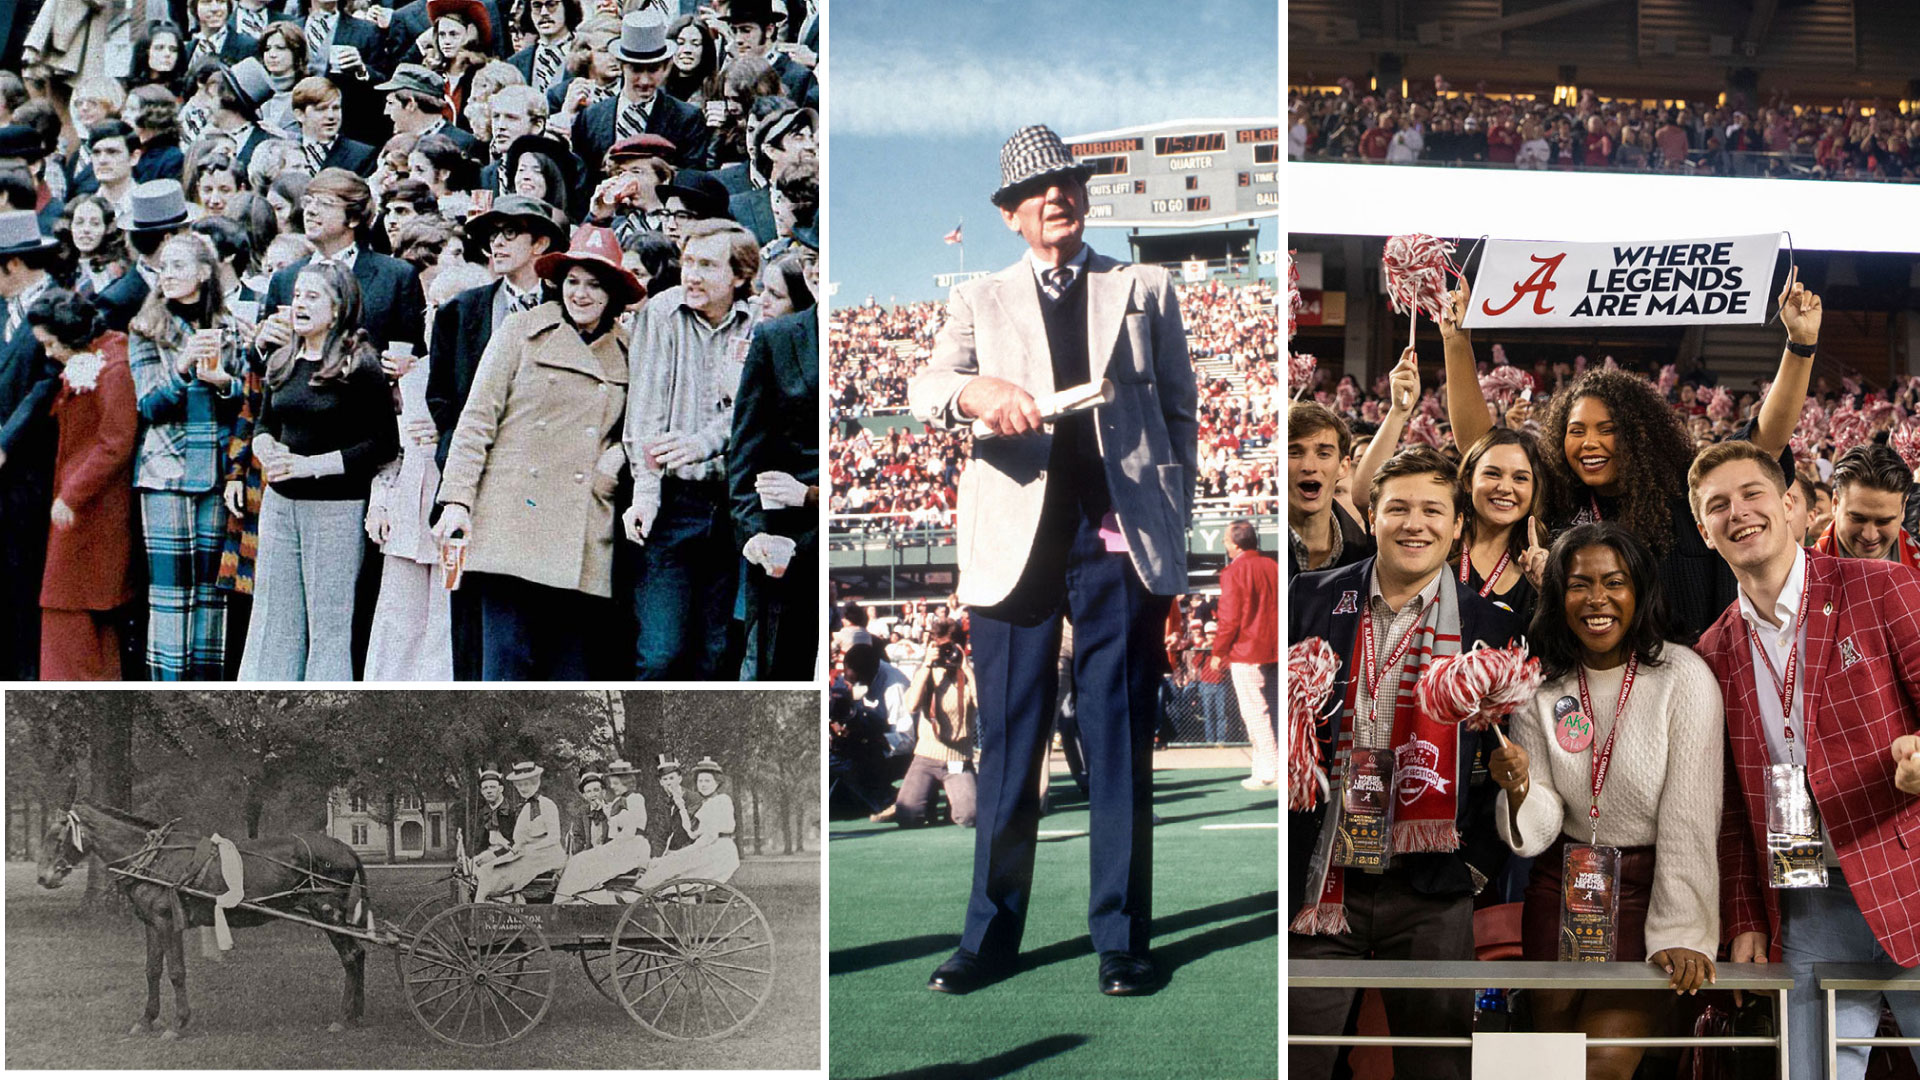 a college of photographs showing different decades of clothing worn for game day